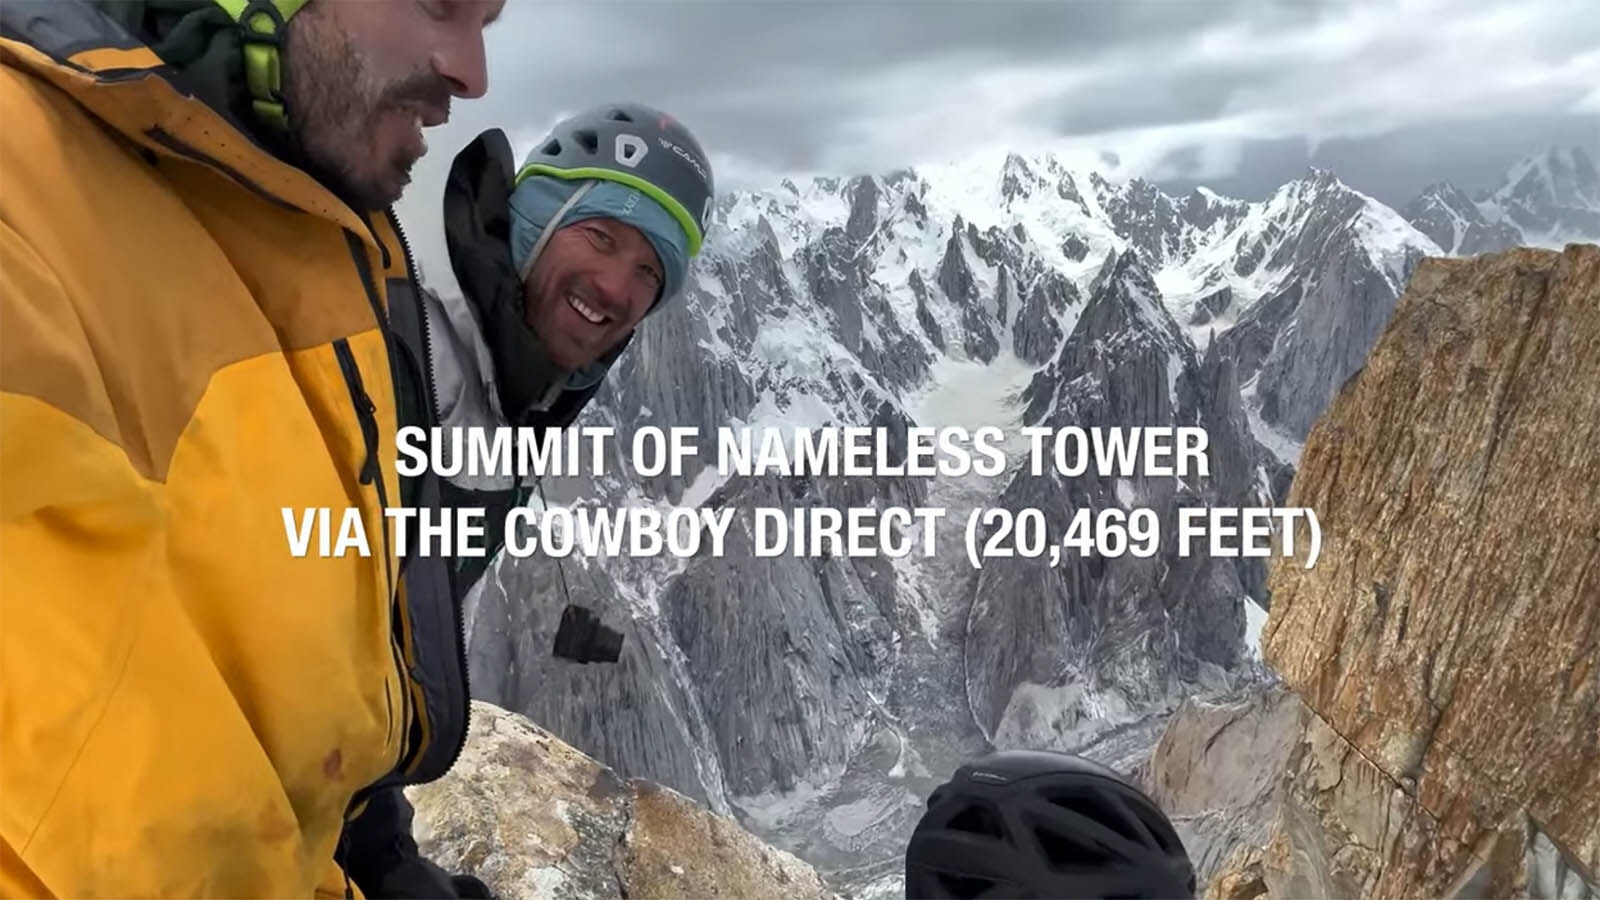 Jesse Huey, Matt Segal and Jordan Cannon were emotional when they finally reached the summit of the Cowboy Direct route.